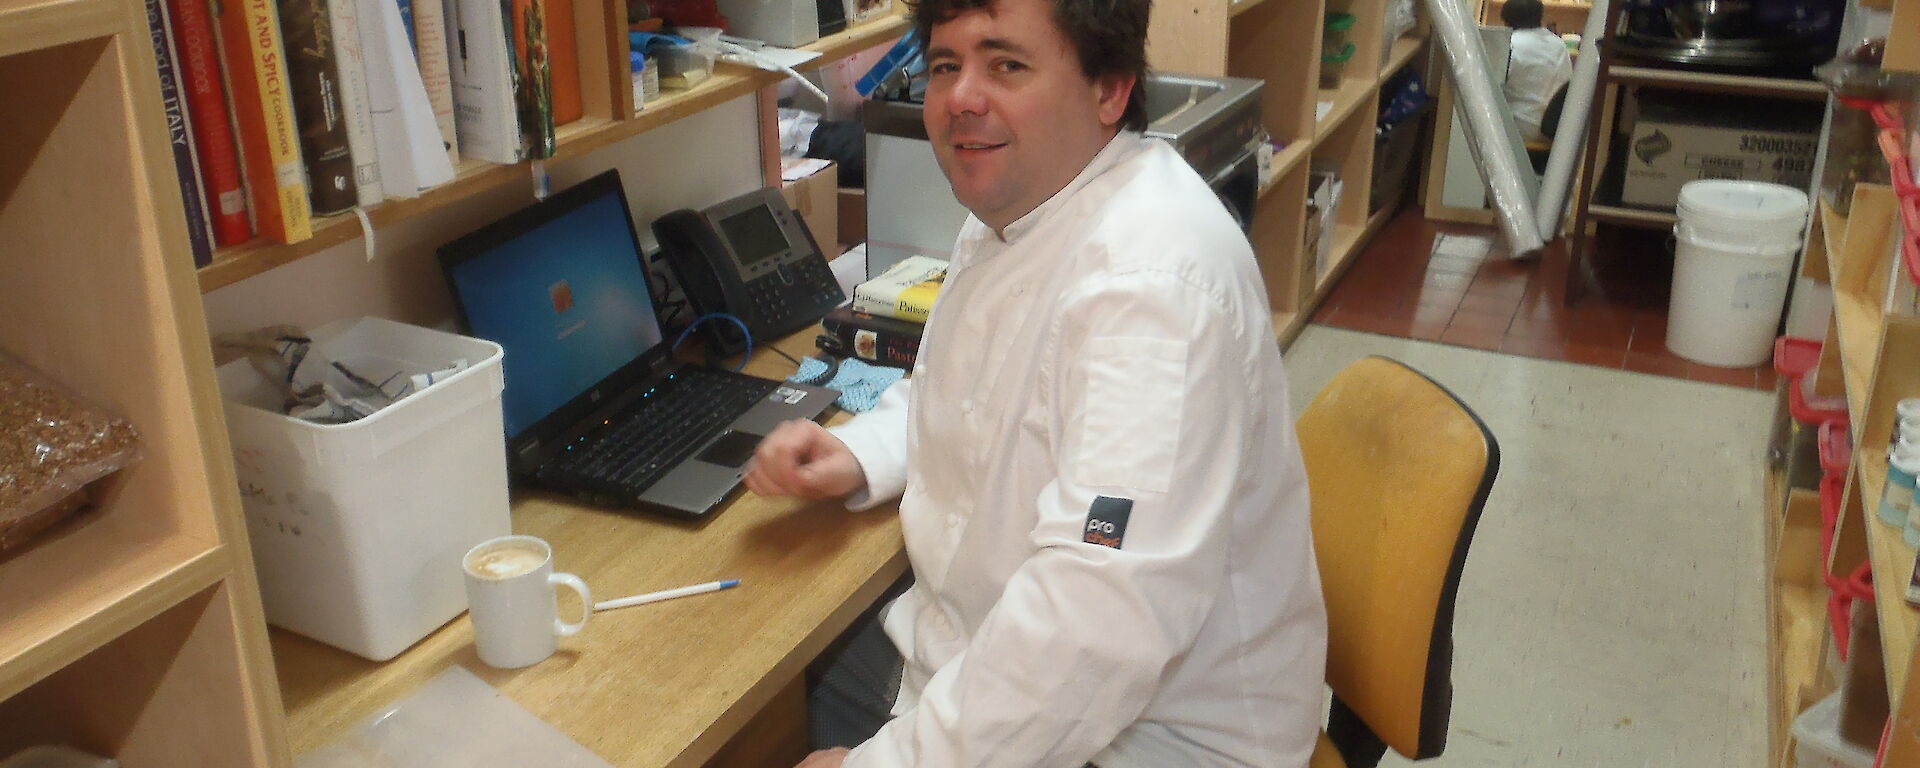 Eddie, the wintering Casey chef, sits on a stool in uniform